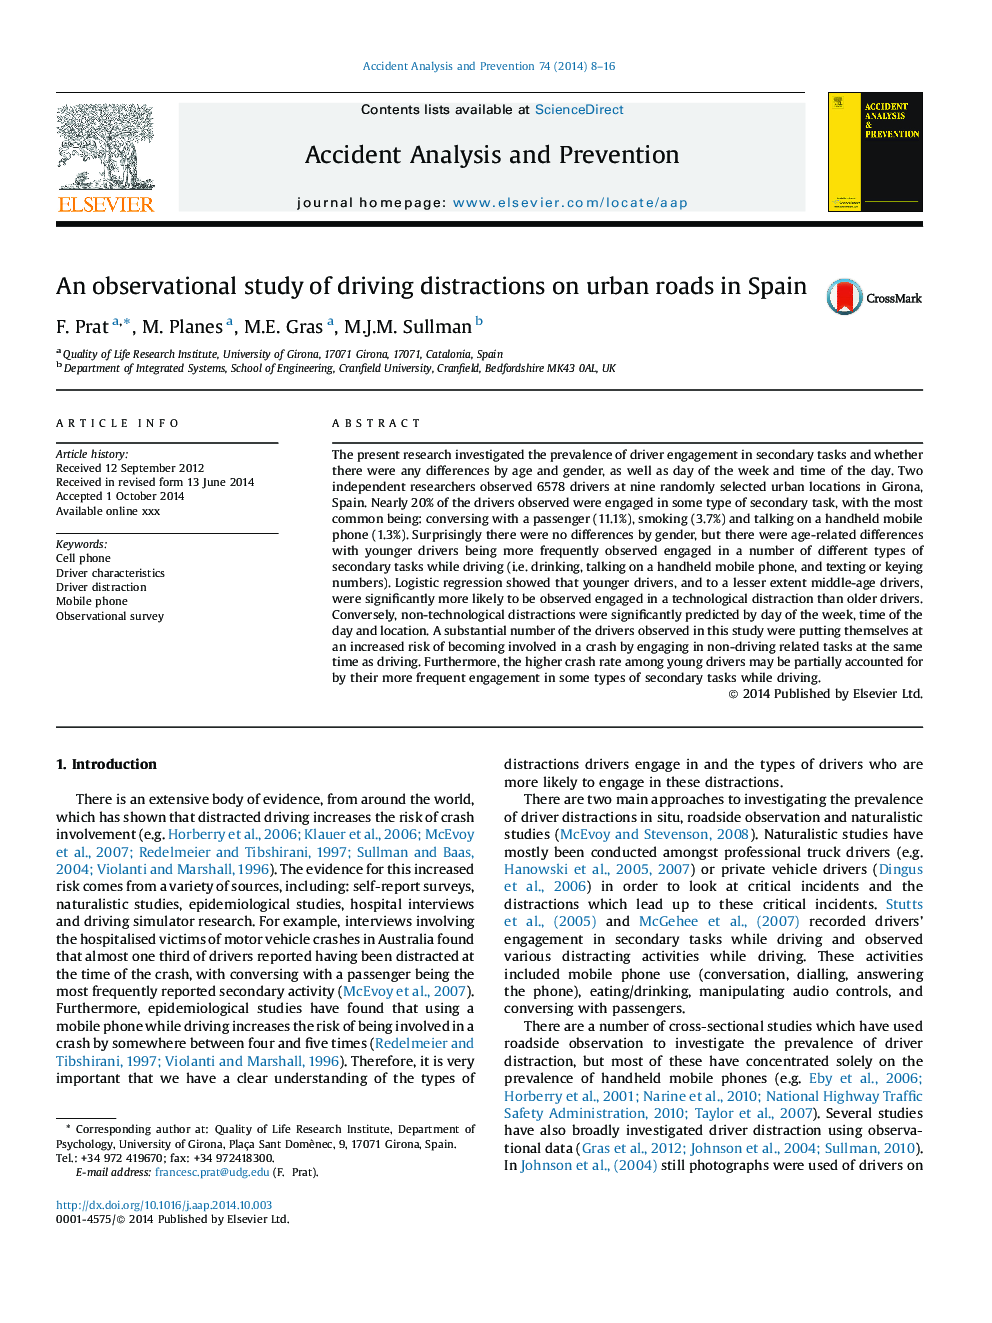 An observational study of driving distractions on urban roads in Spain